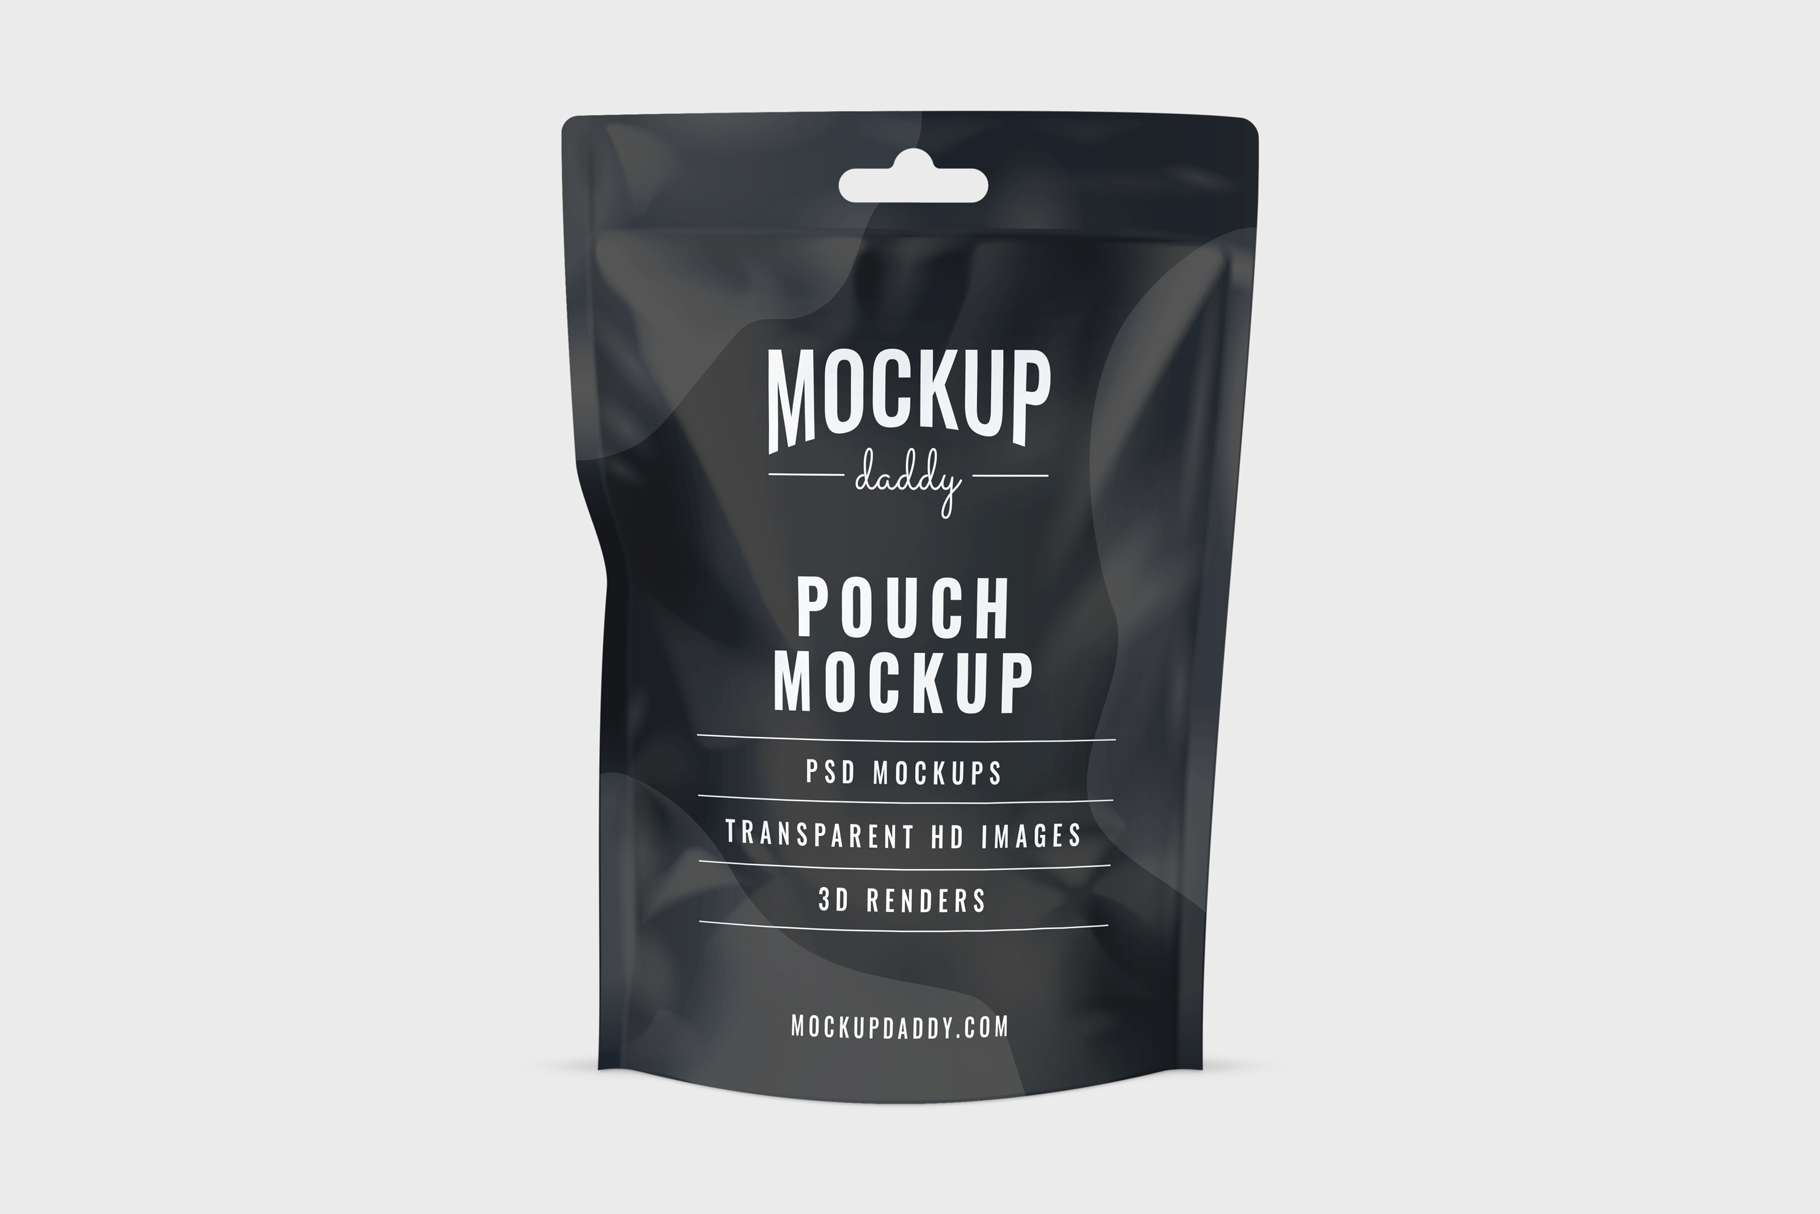 Black packaging pouch mockup on a white background